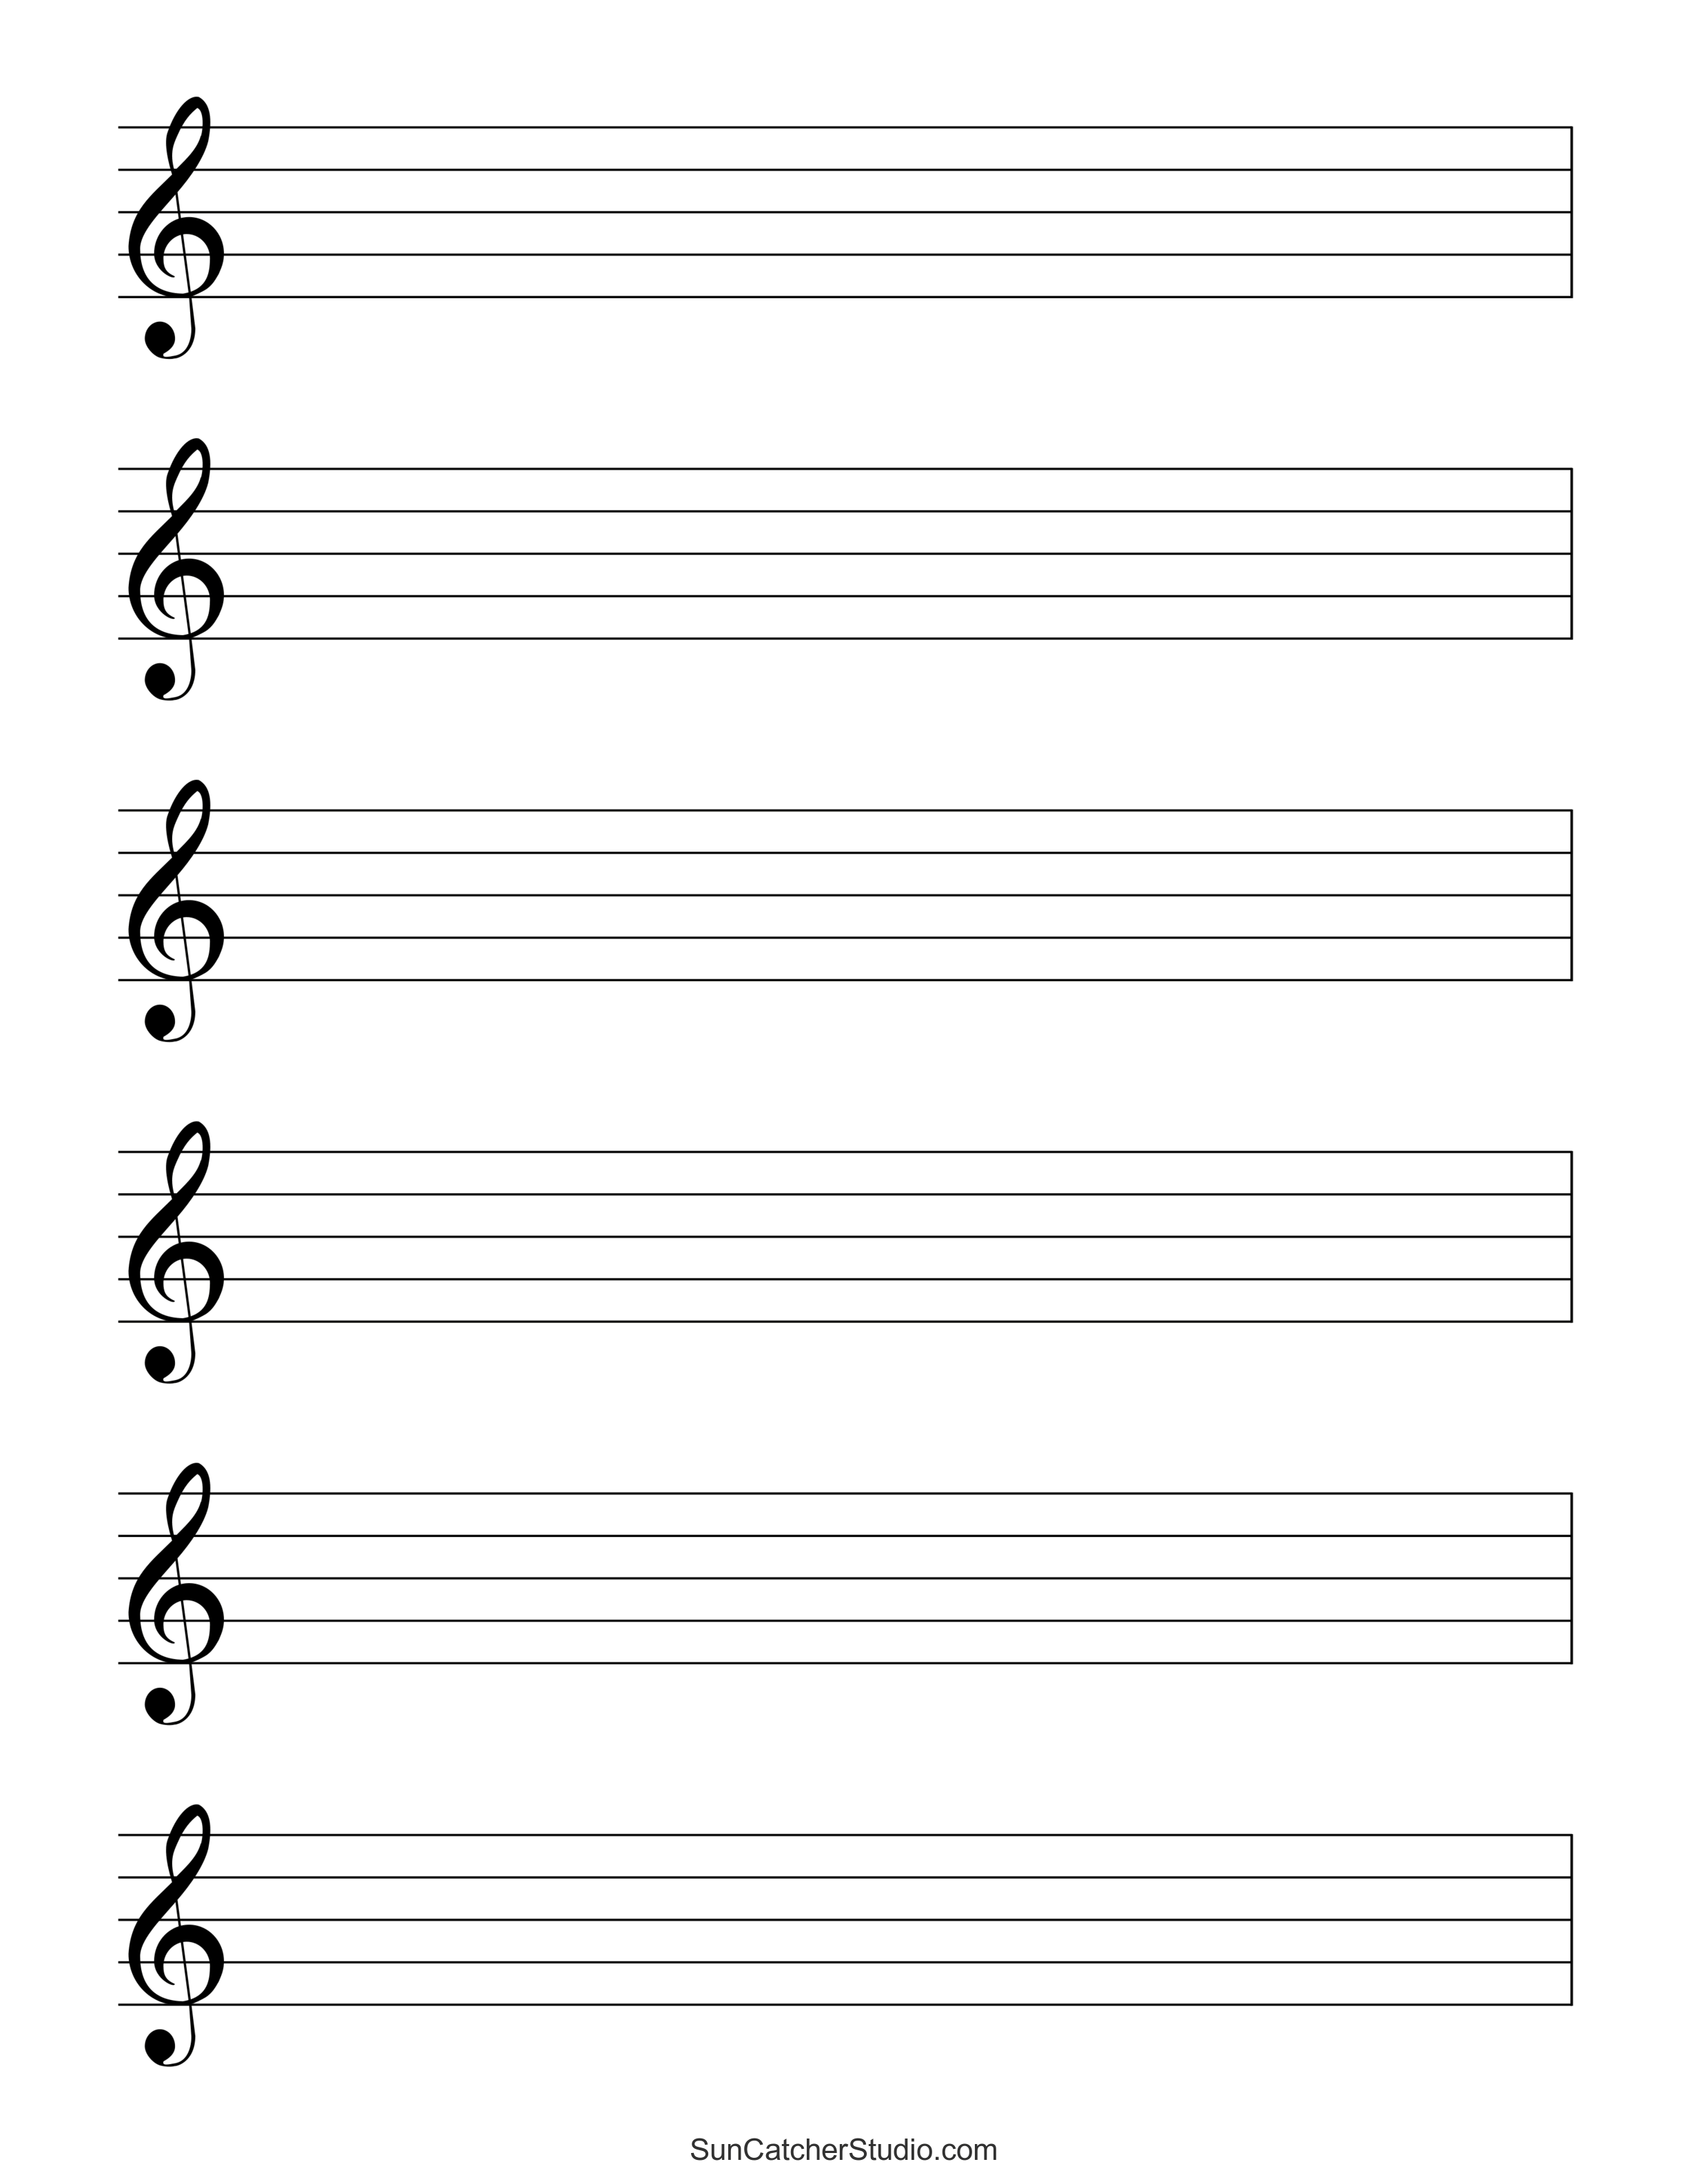 Blank Sheet Music (Free Printable Staff Paper) – DIY Projects